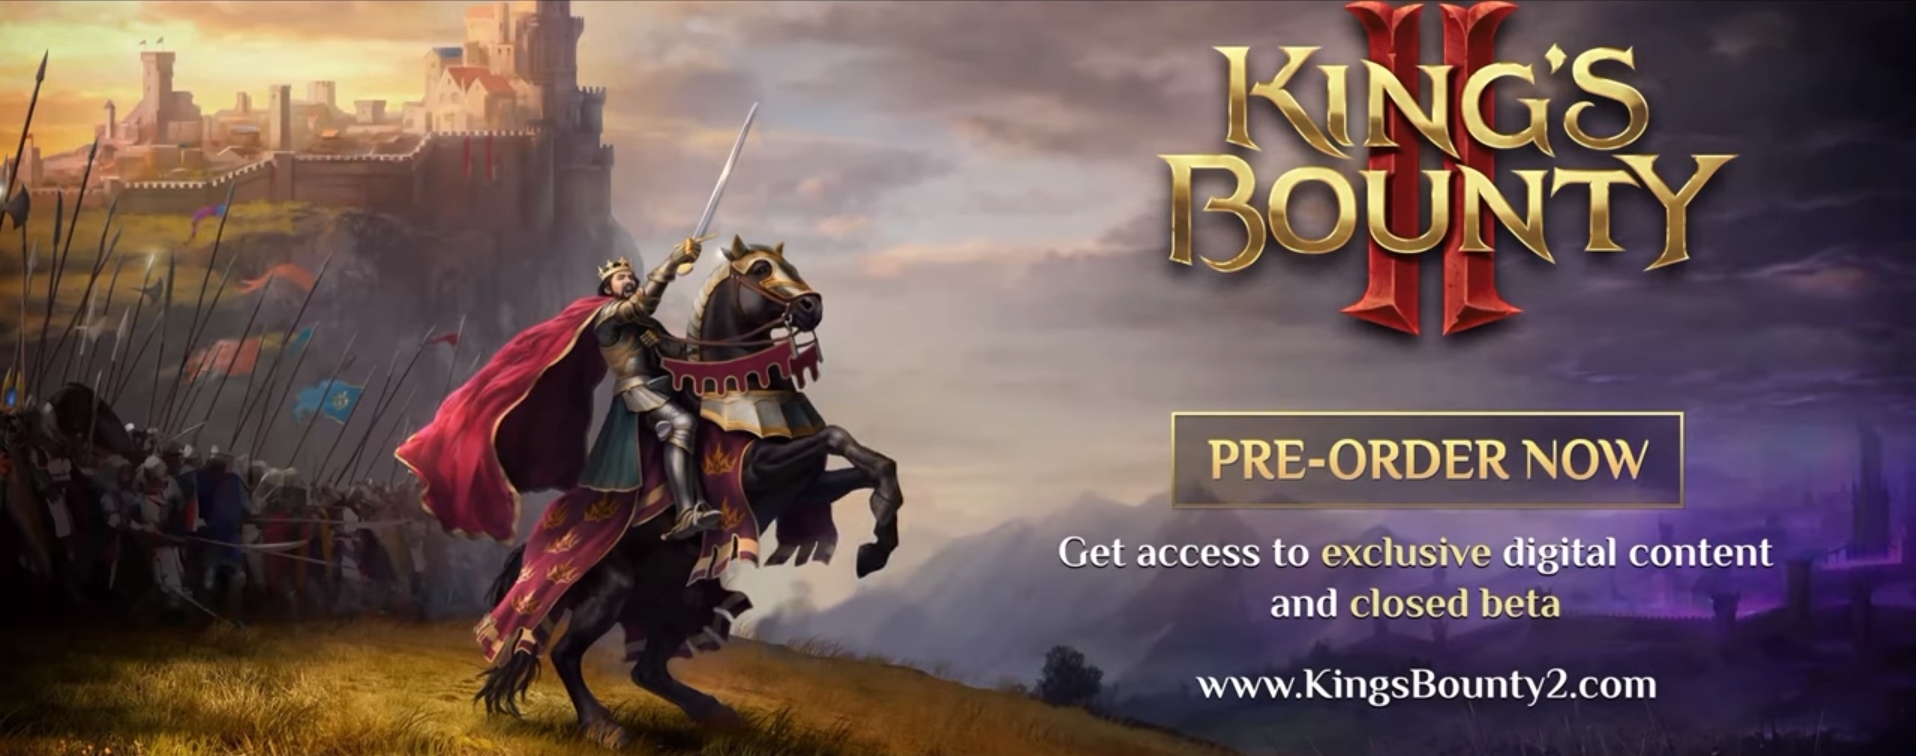 King’s Bounty II Releases Official Reveal Trailer, Tentative Release Date